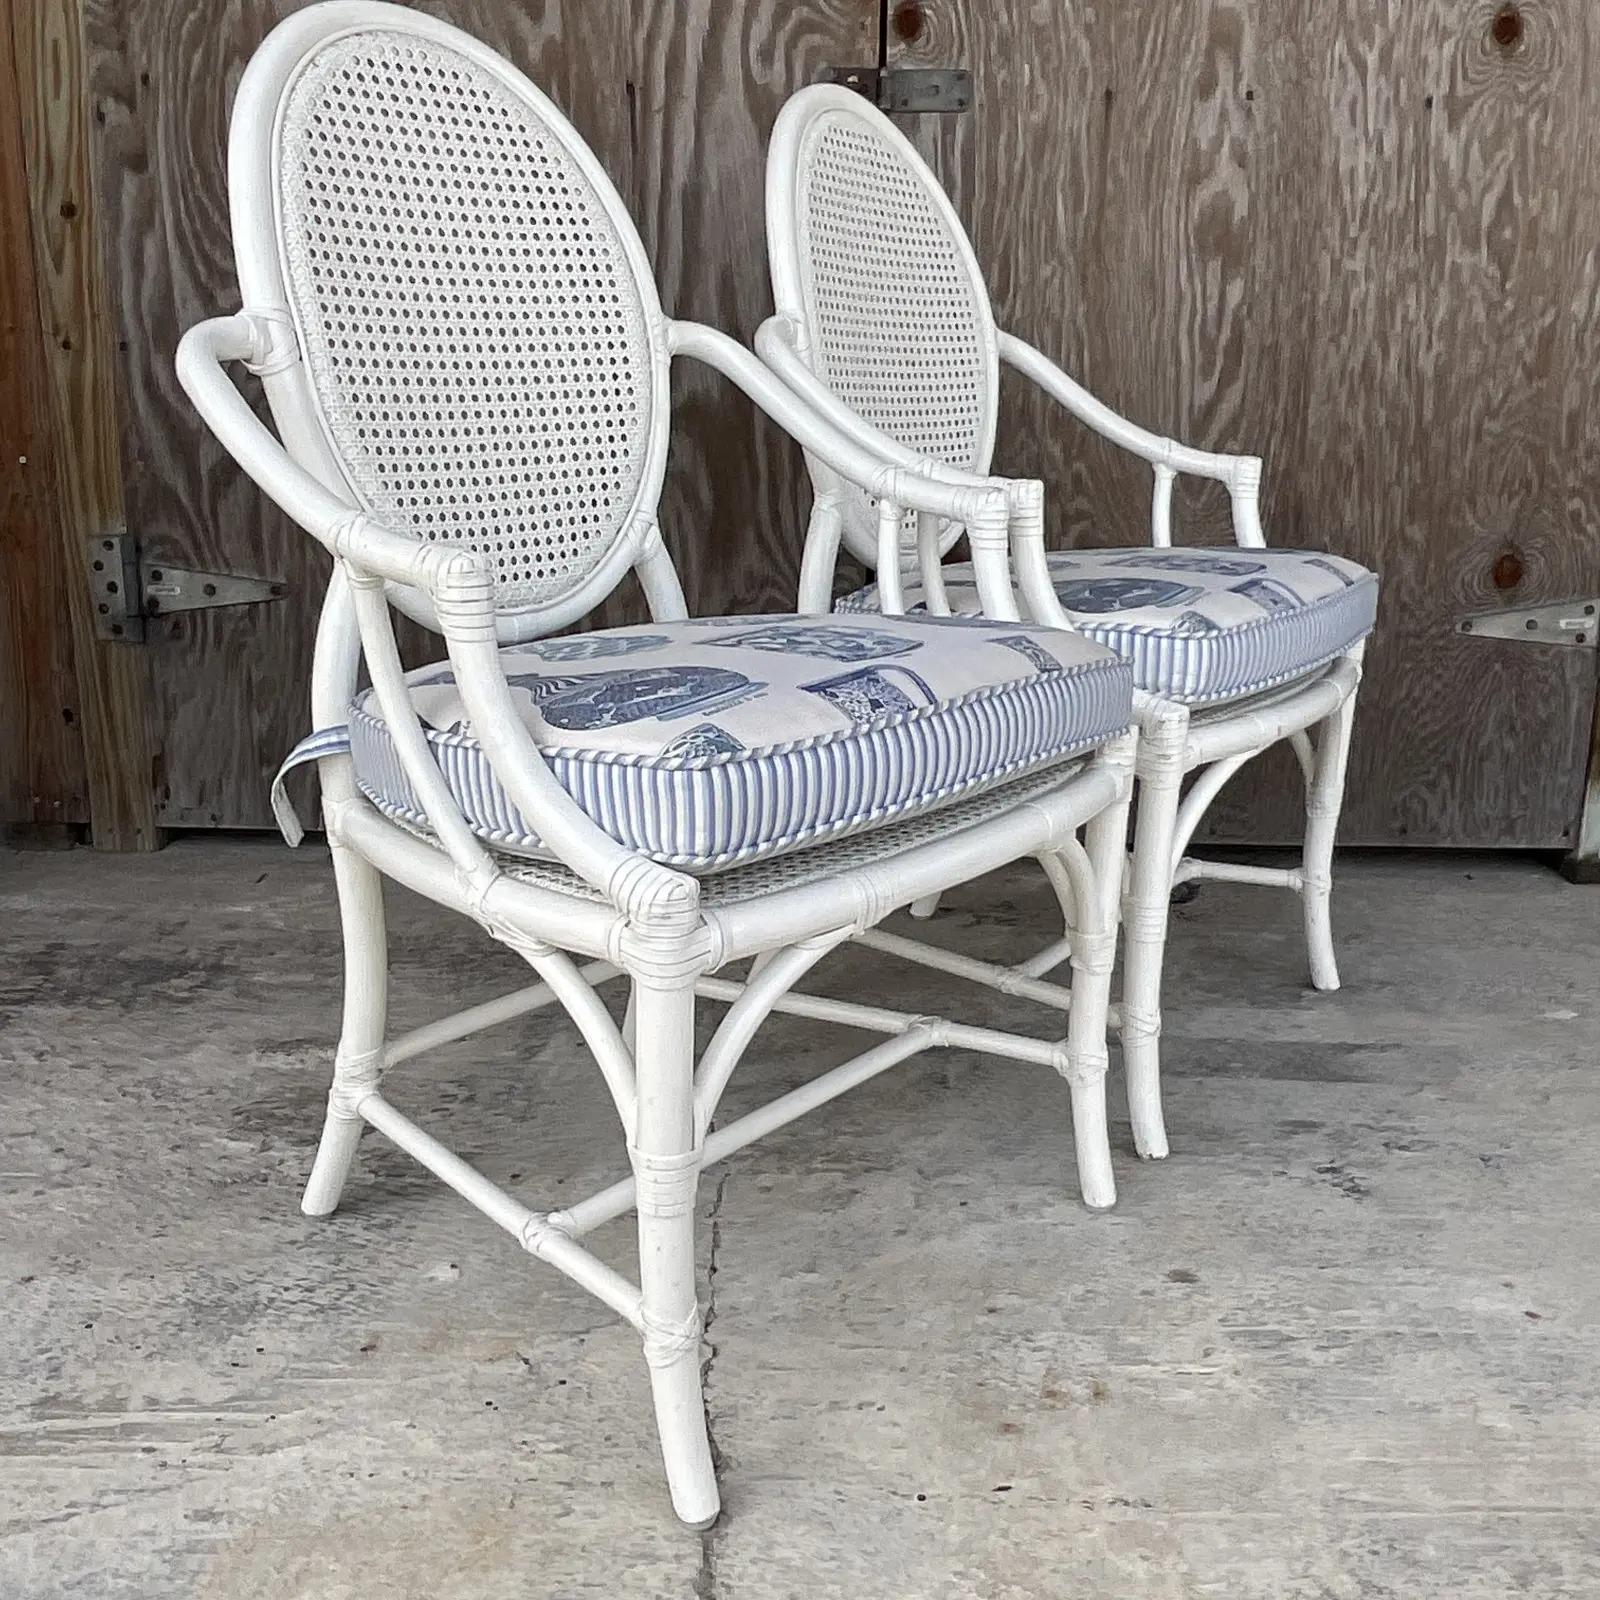 Fantastic pair of vintage McGuire Arm chairs. Beautiful rattan frame with inset cane panels. Lacquered in a semi gloss lacquered finish with a stunning blue and white ginger jar upholstery. Tagged on the bottom. Acquired from a Palm Beach estate.